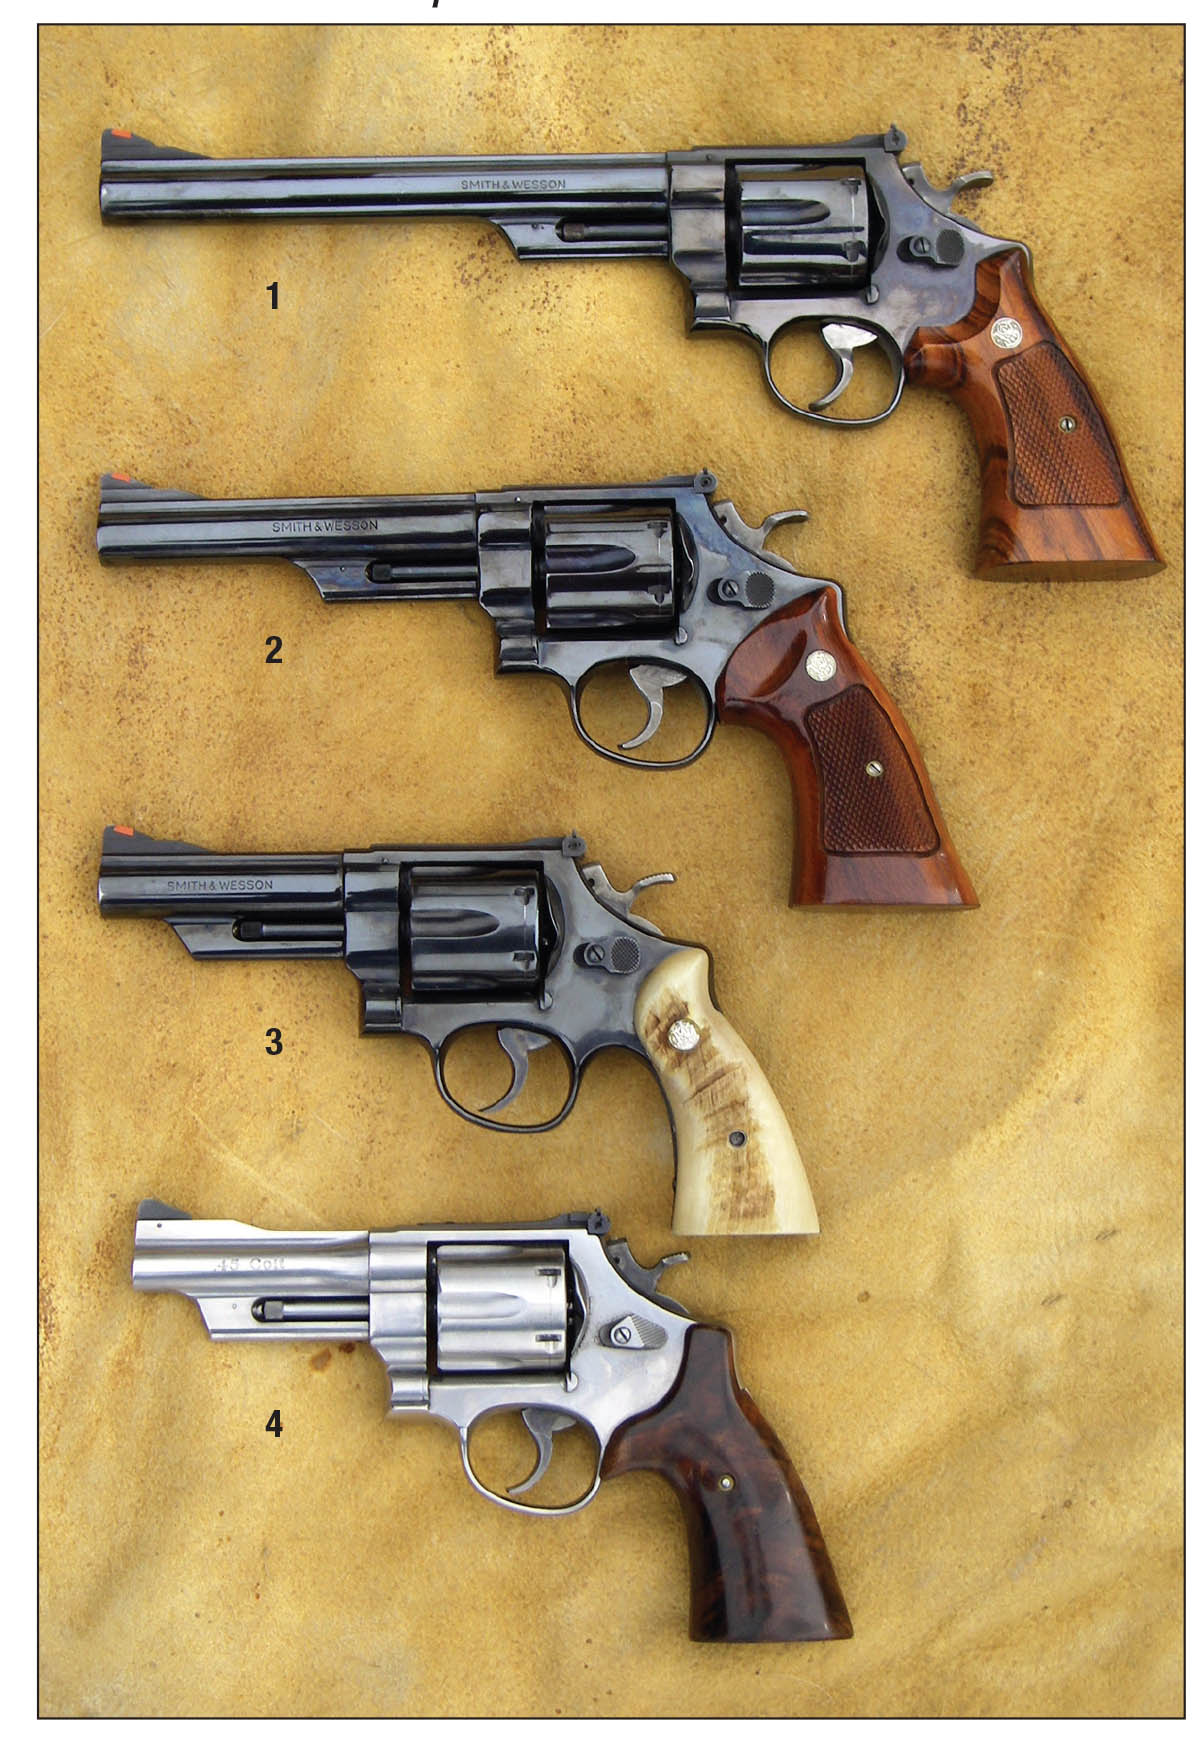 These Smith & Wesson .45 Colts include a (1) Model 25-5 with 83⁄8-inch barrel, (2) Model 25-5 with 6-inch barrel,  (3) Model 25-5 with 4-inch barrel and a (4) Model 625-6 Mountain Gun with a tapered 4-inch barrel.